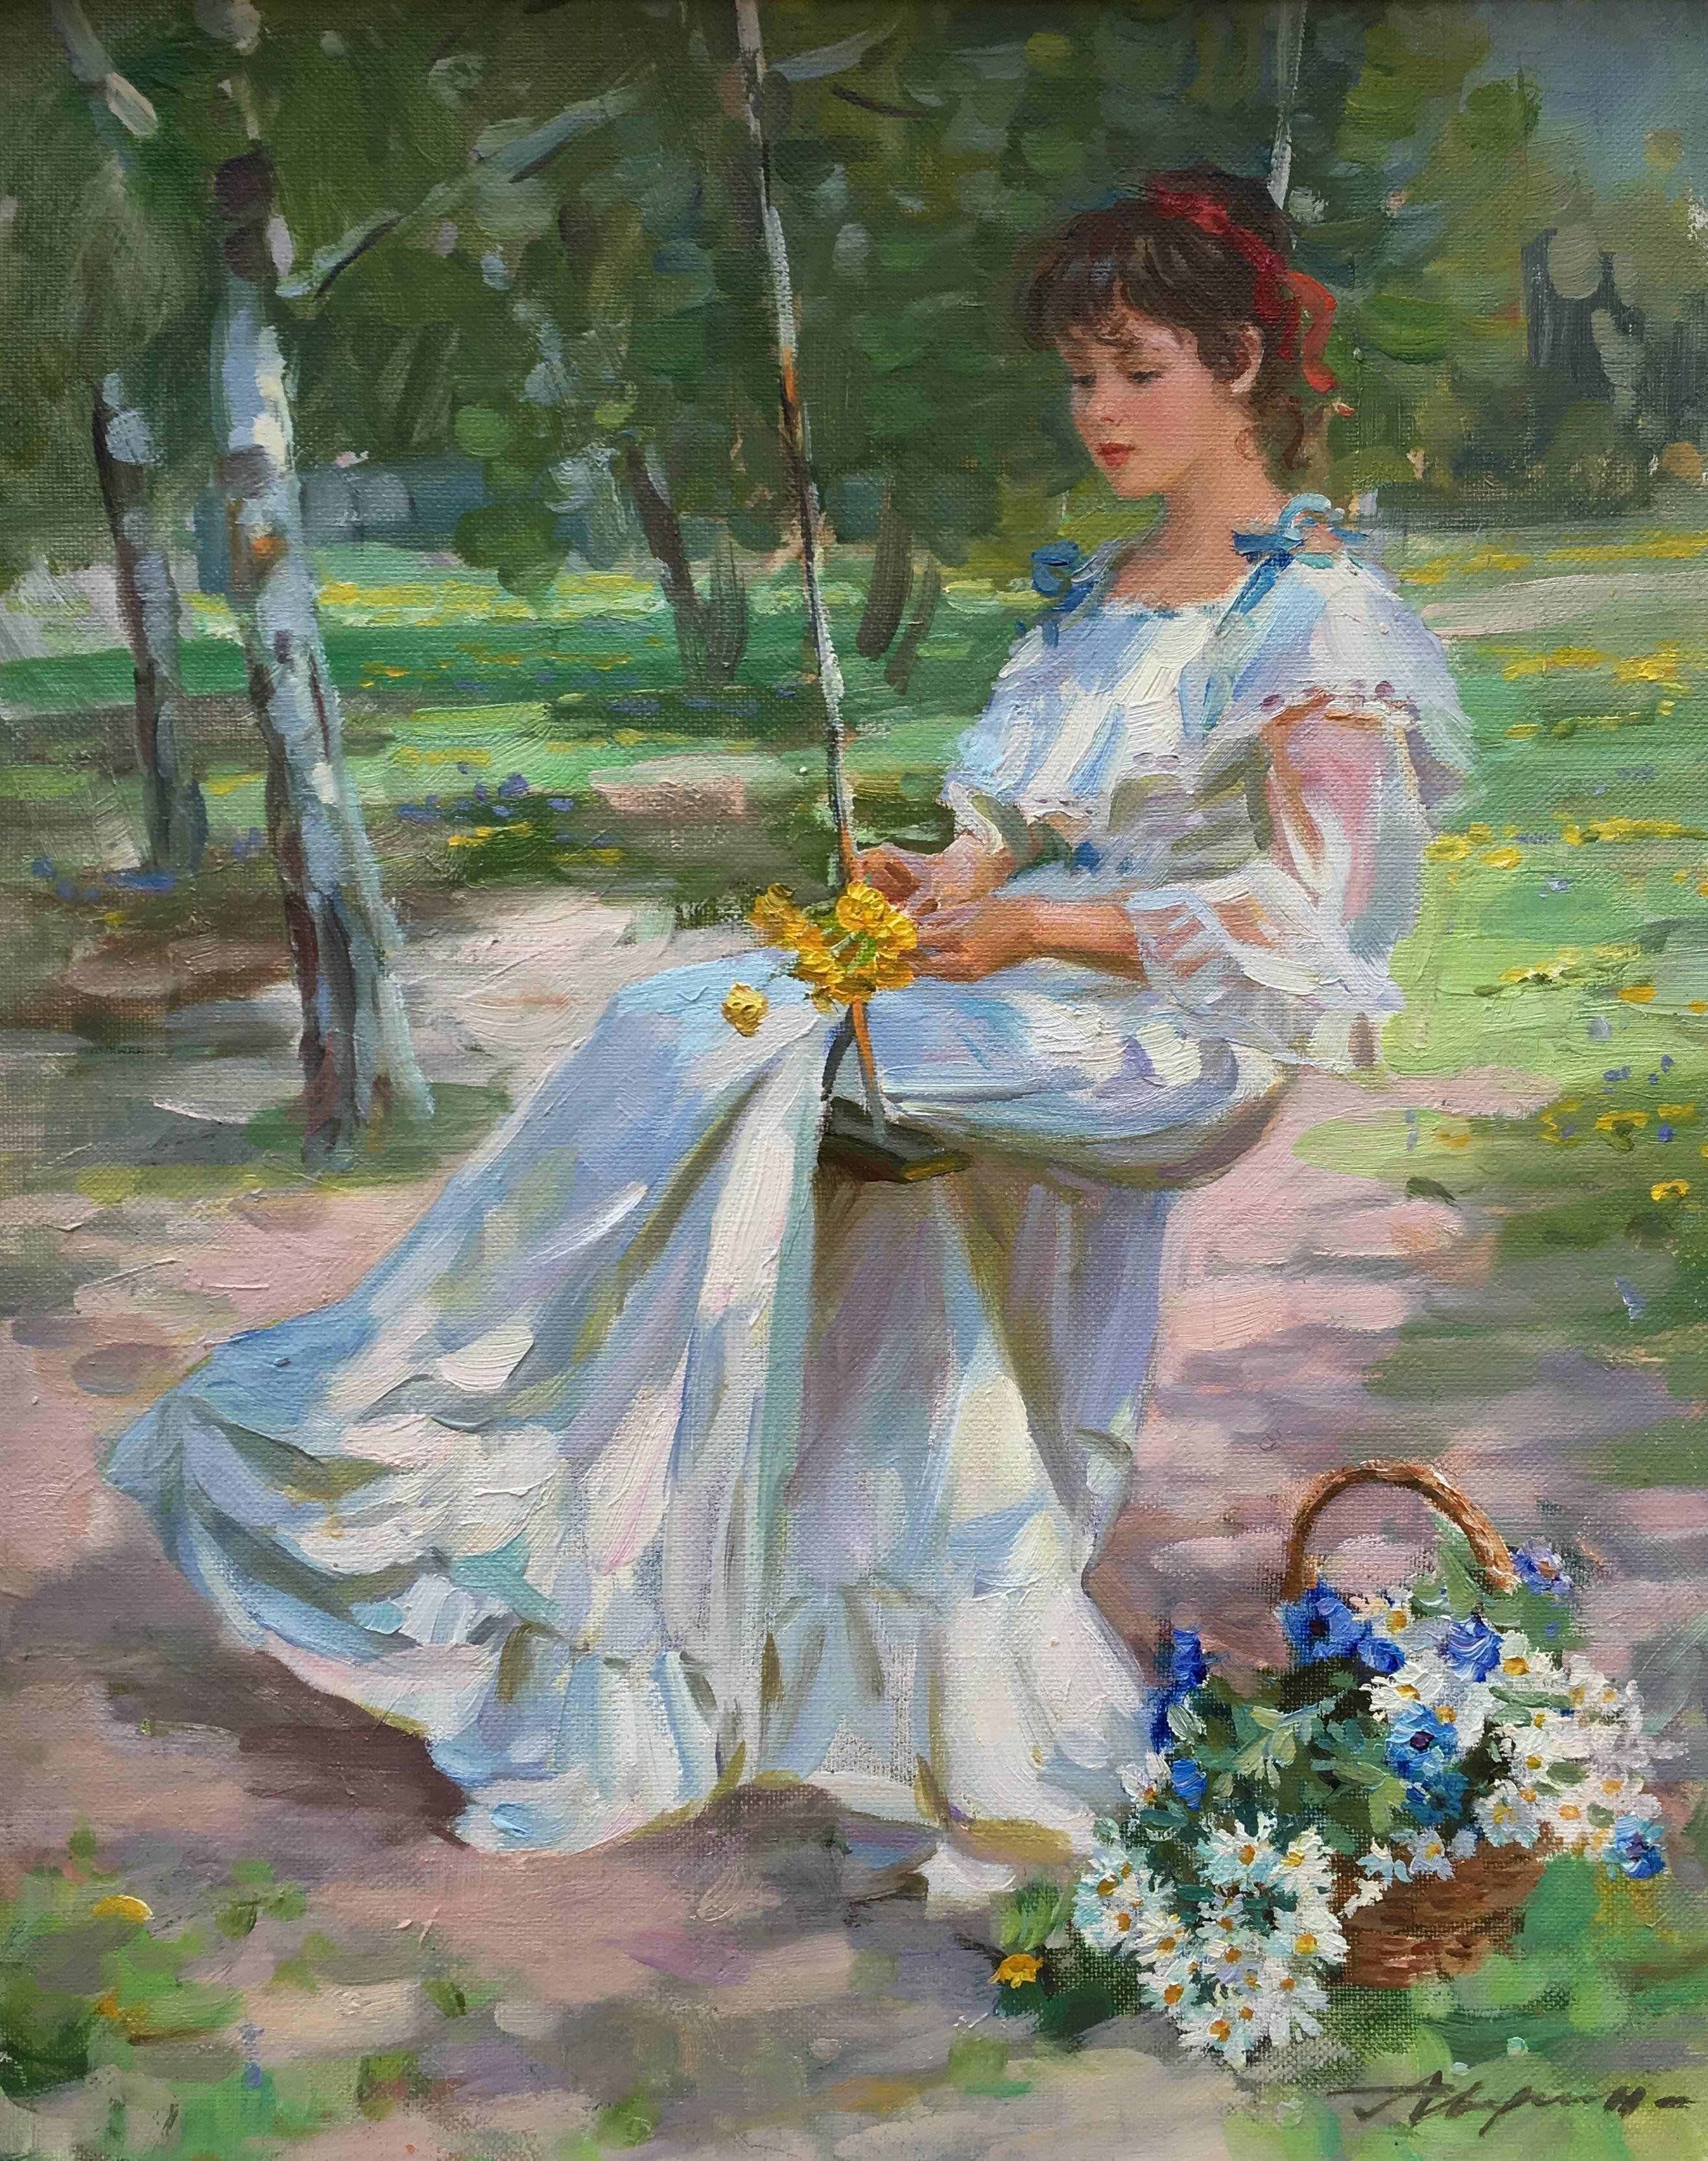 Alexander Averin Landscape Painting - "Spring day" garden and lady with flowers. Averin postimpressionist oil on canva